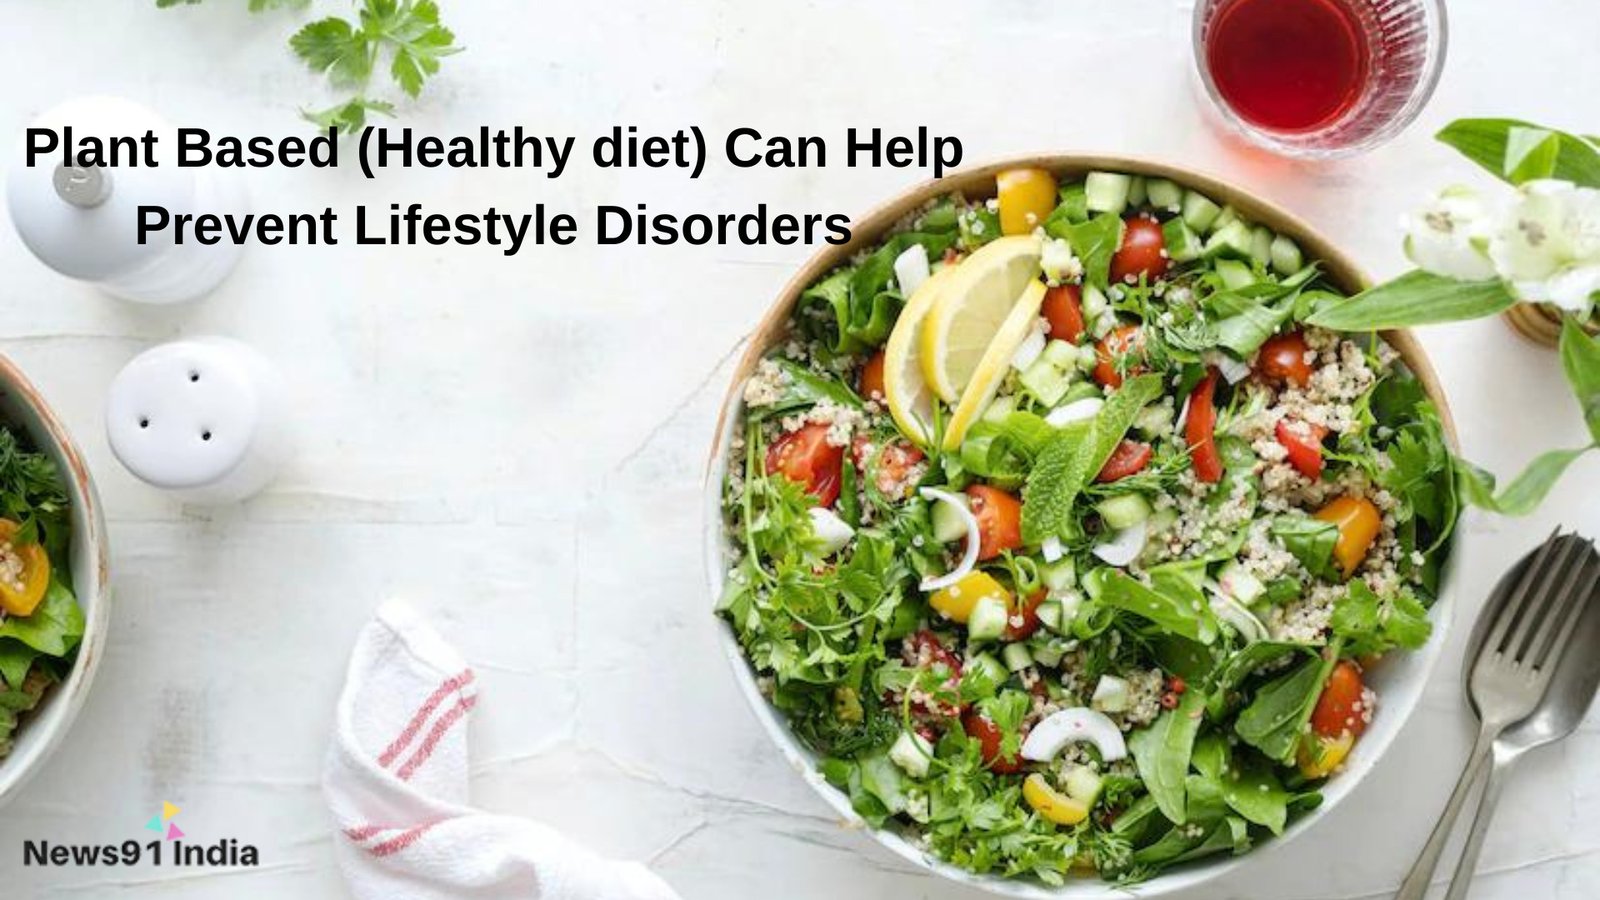 Here’s How Plant-Based Can Help Prevent Lifestyle Disorders